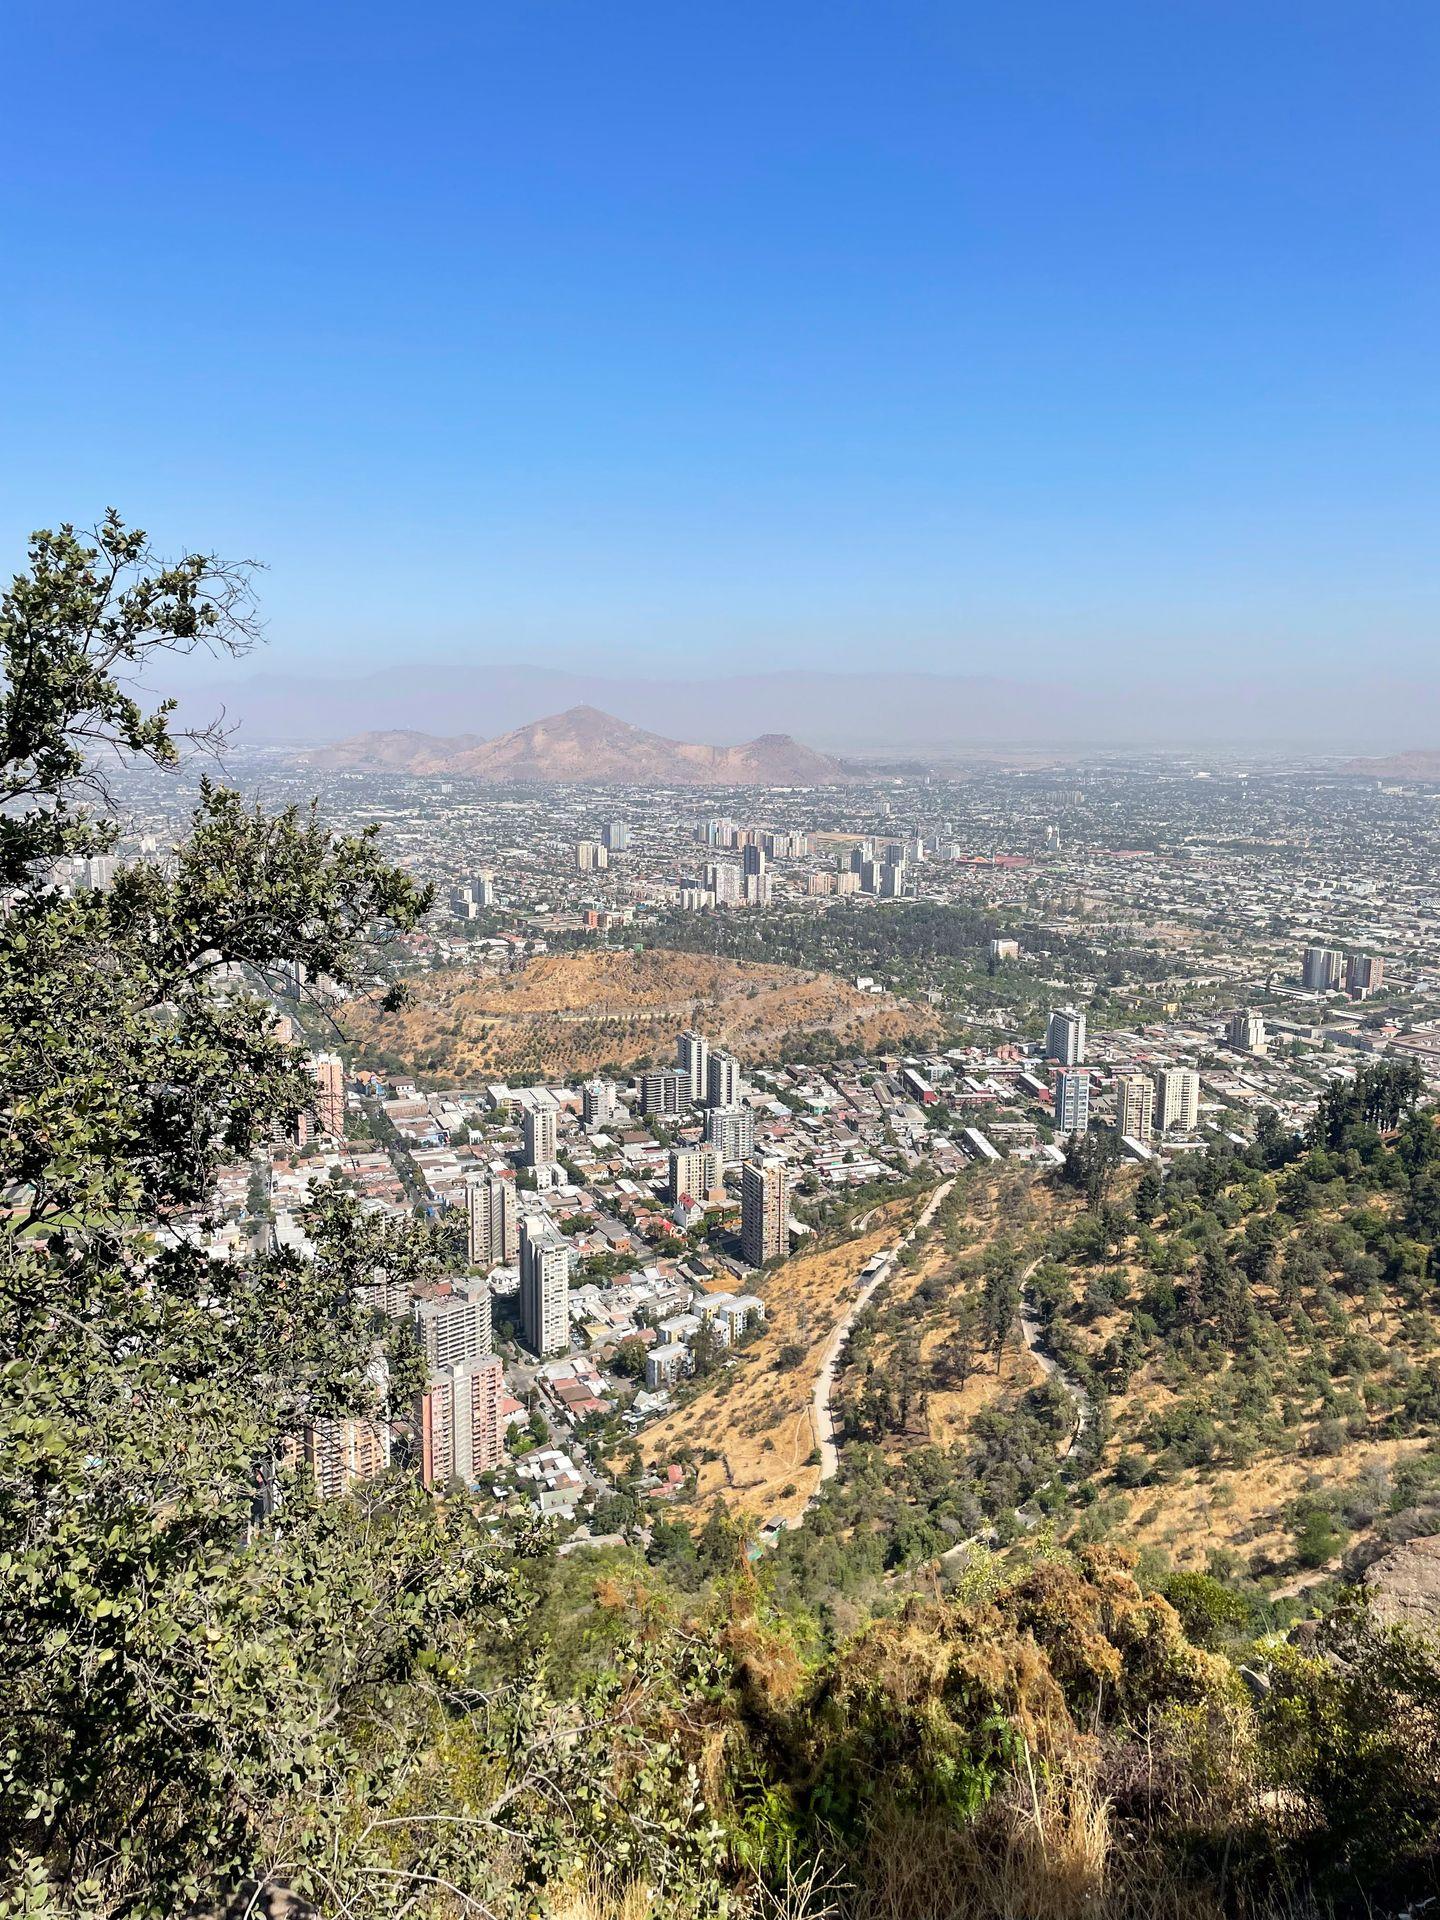 Looking down from a mountain at the city of Santiago. There is a mix of skyscrapers and shorter buildings.